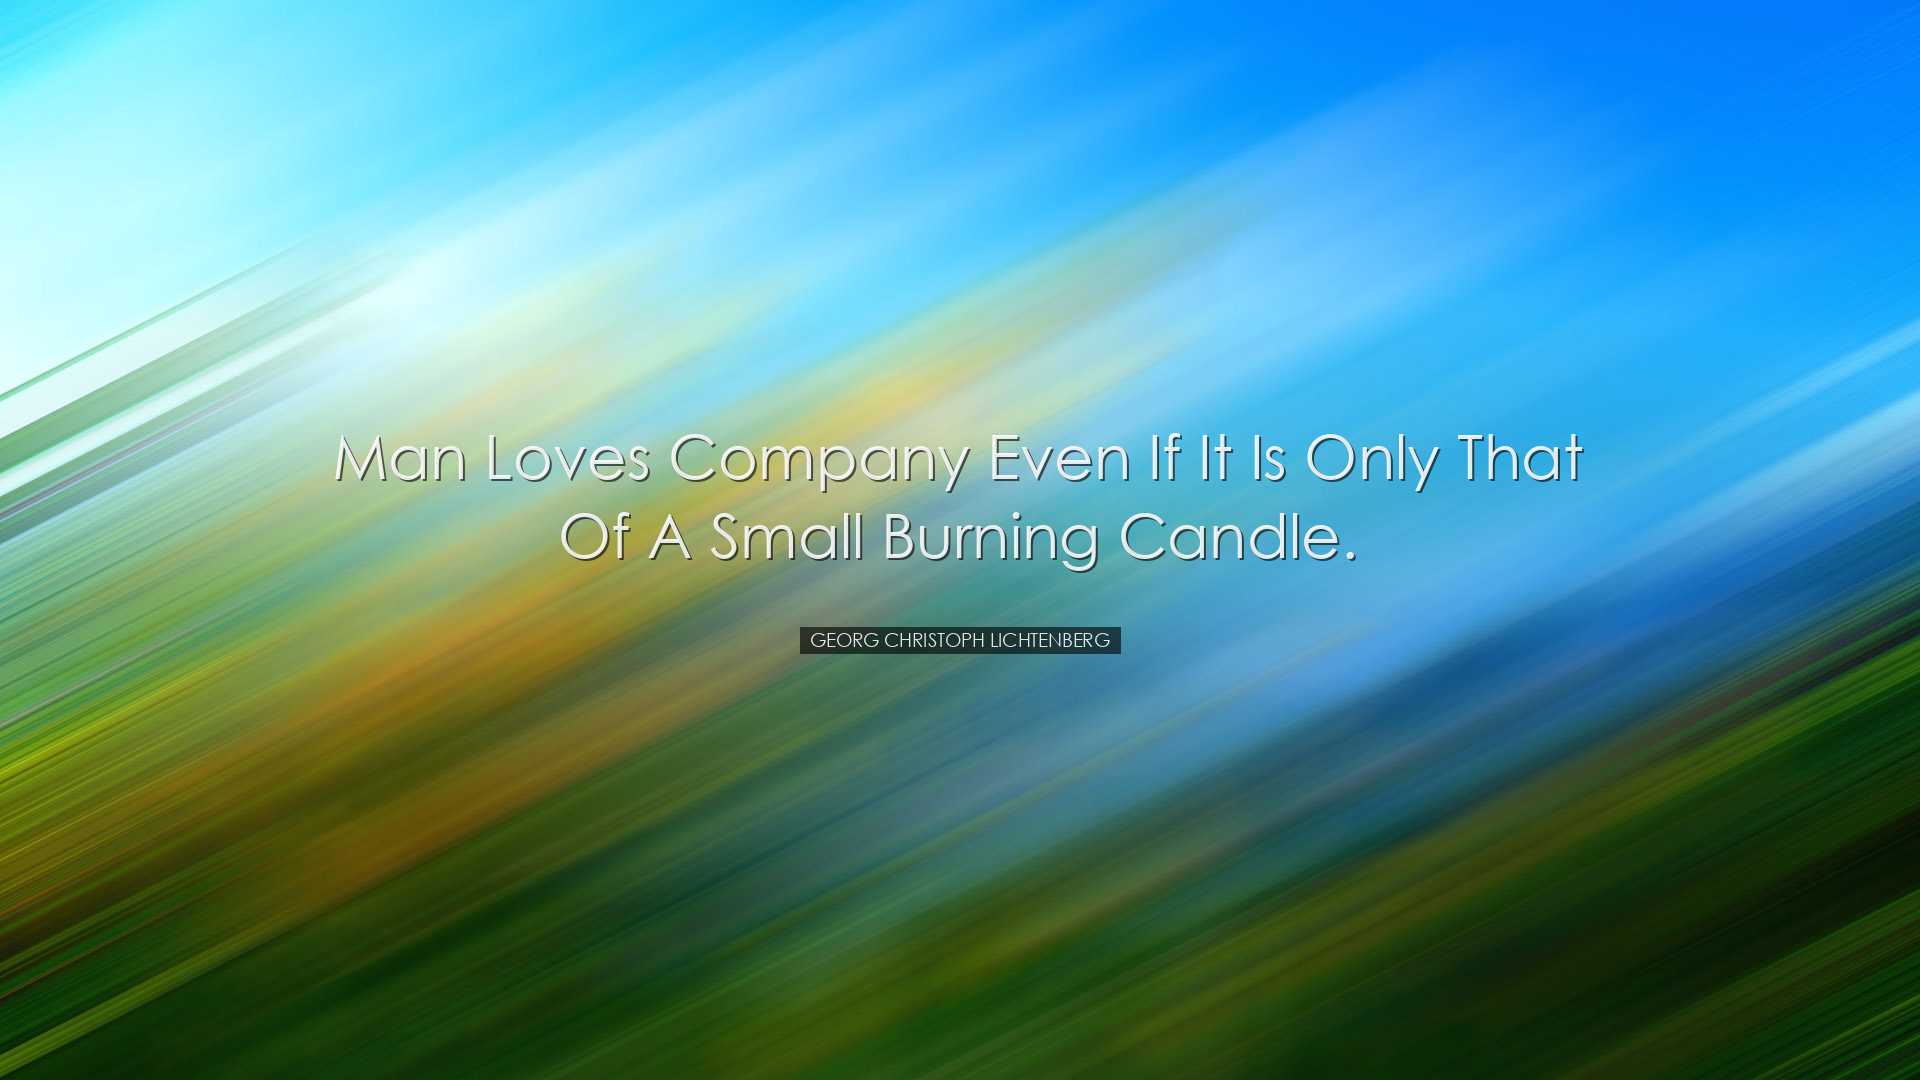 Man loves company even if it is only that of a small burning candl